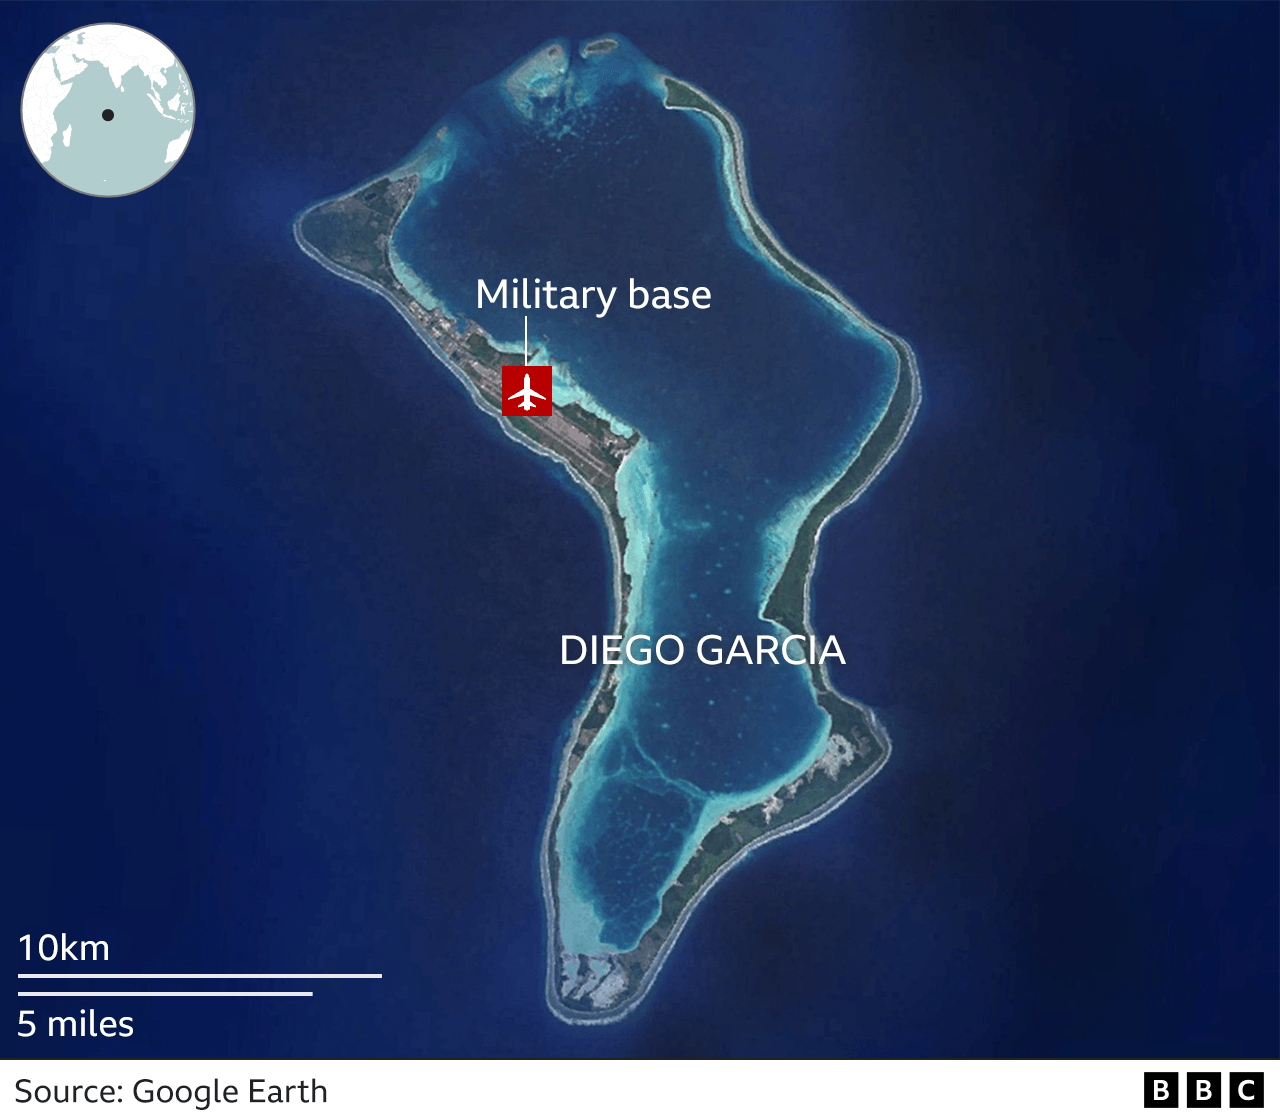 Satellite image of Diego Garcia, with a label showing the location of the UK/US military base to the north-west